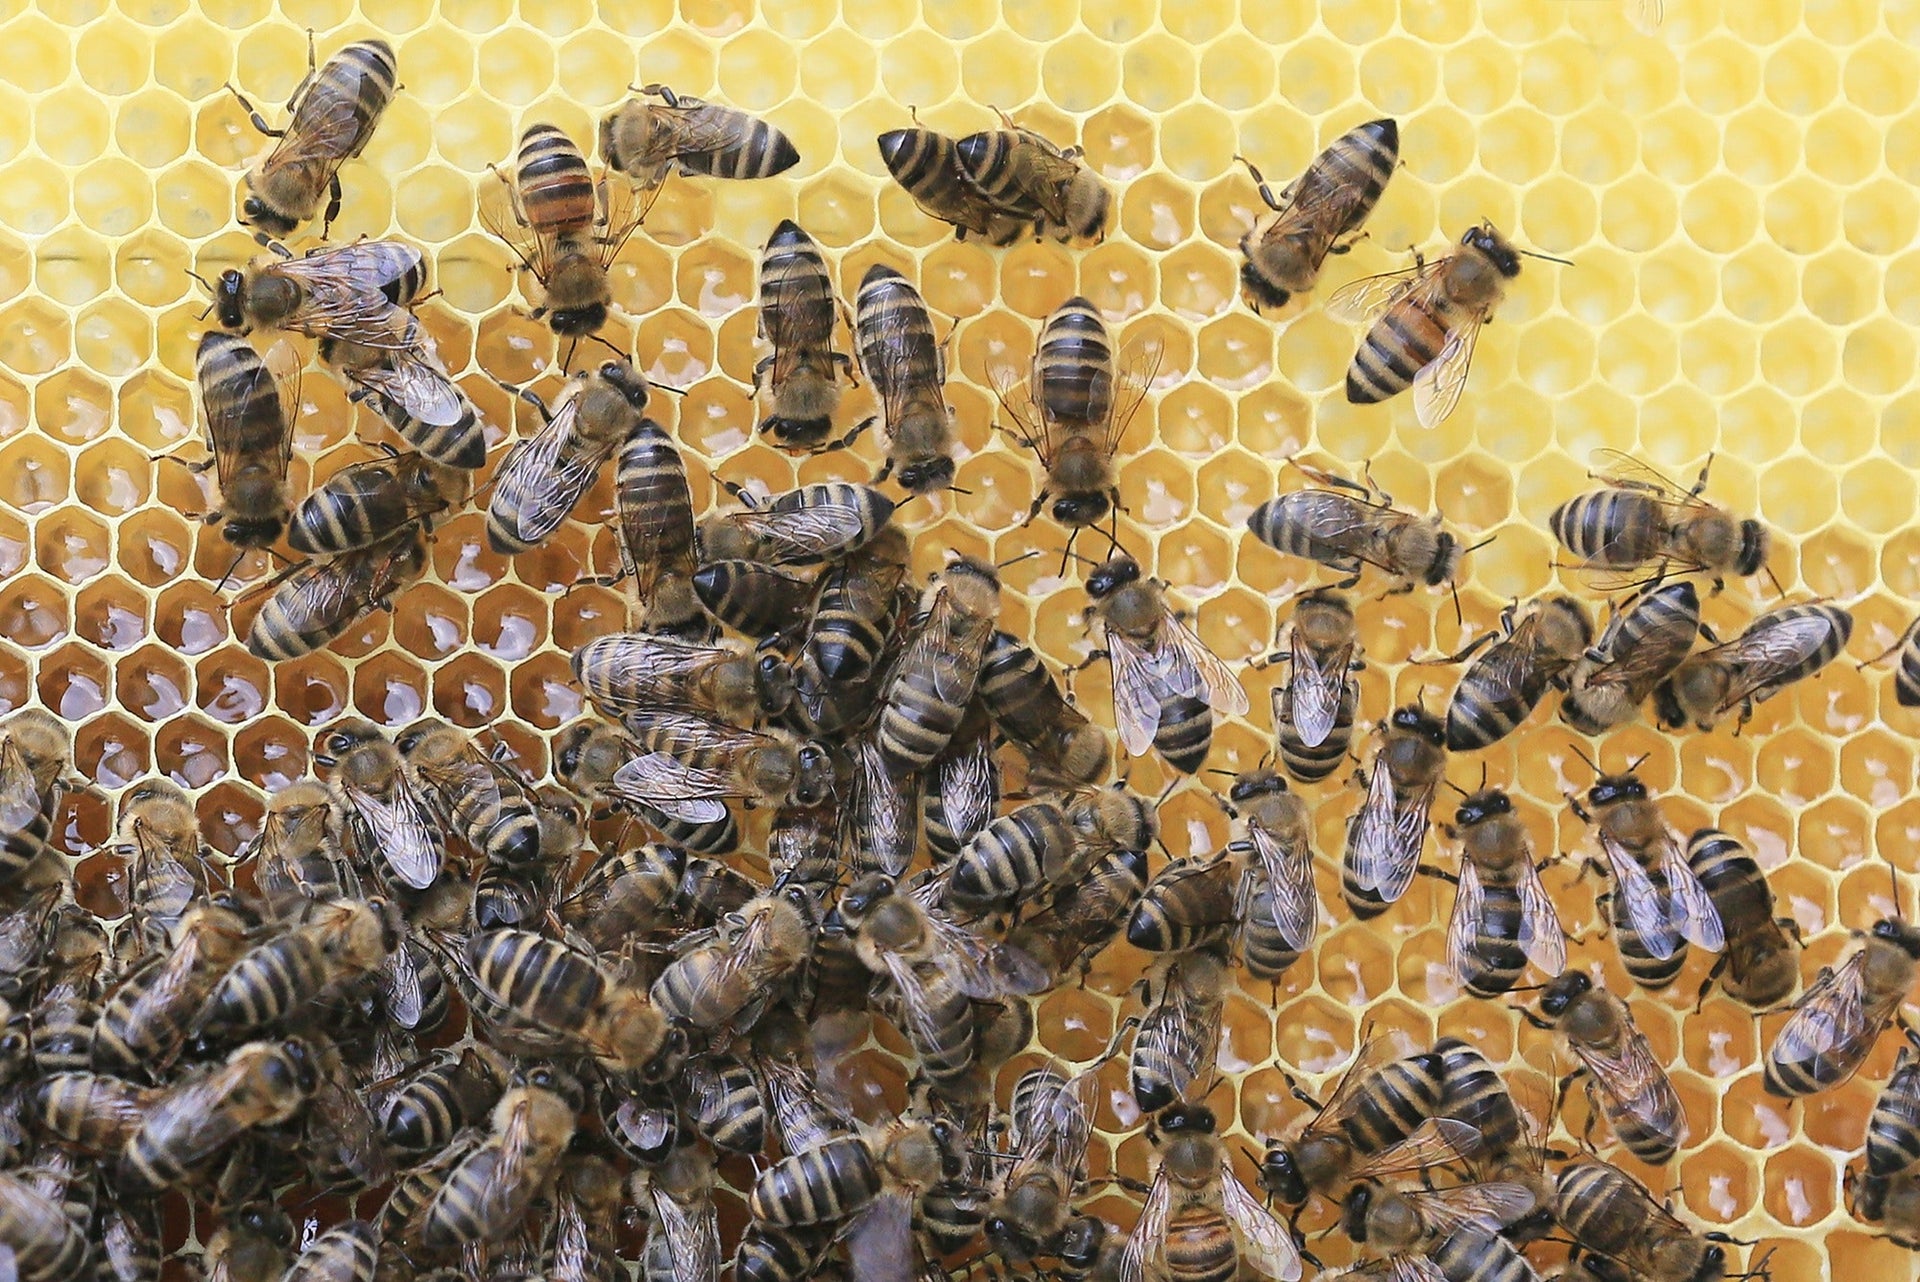 Load video: A little intro to our Bee Family